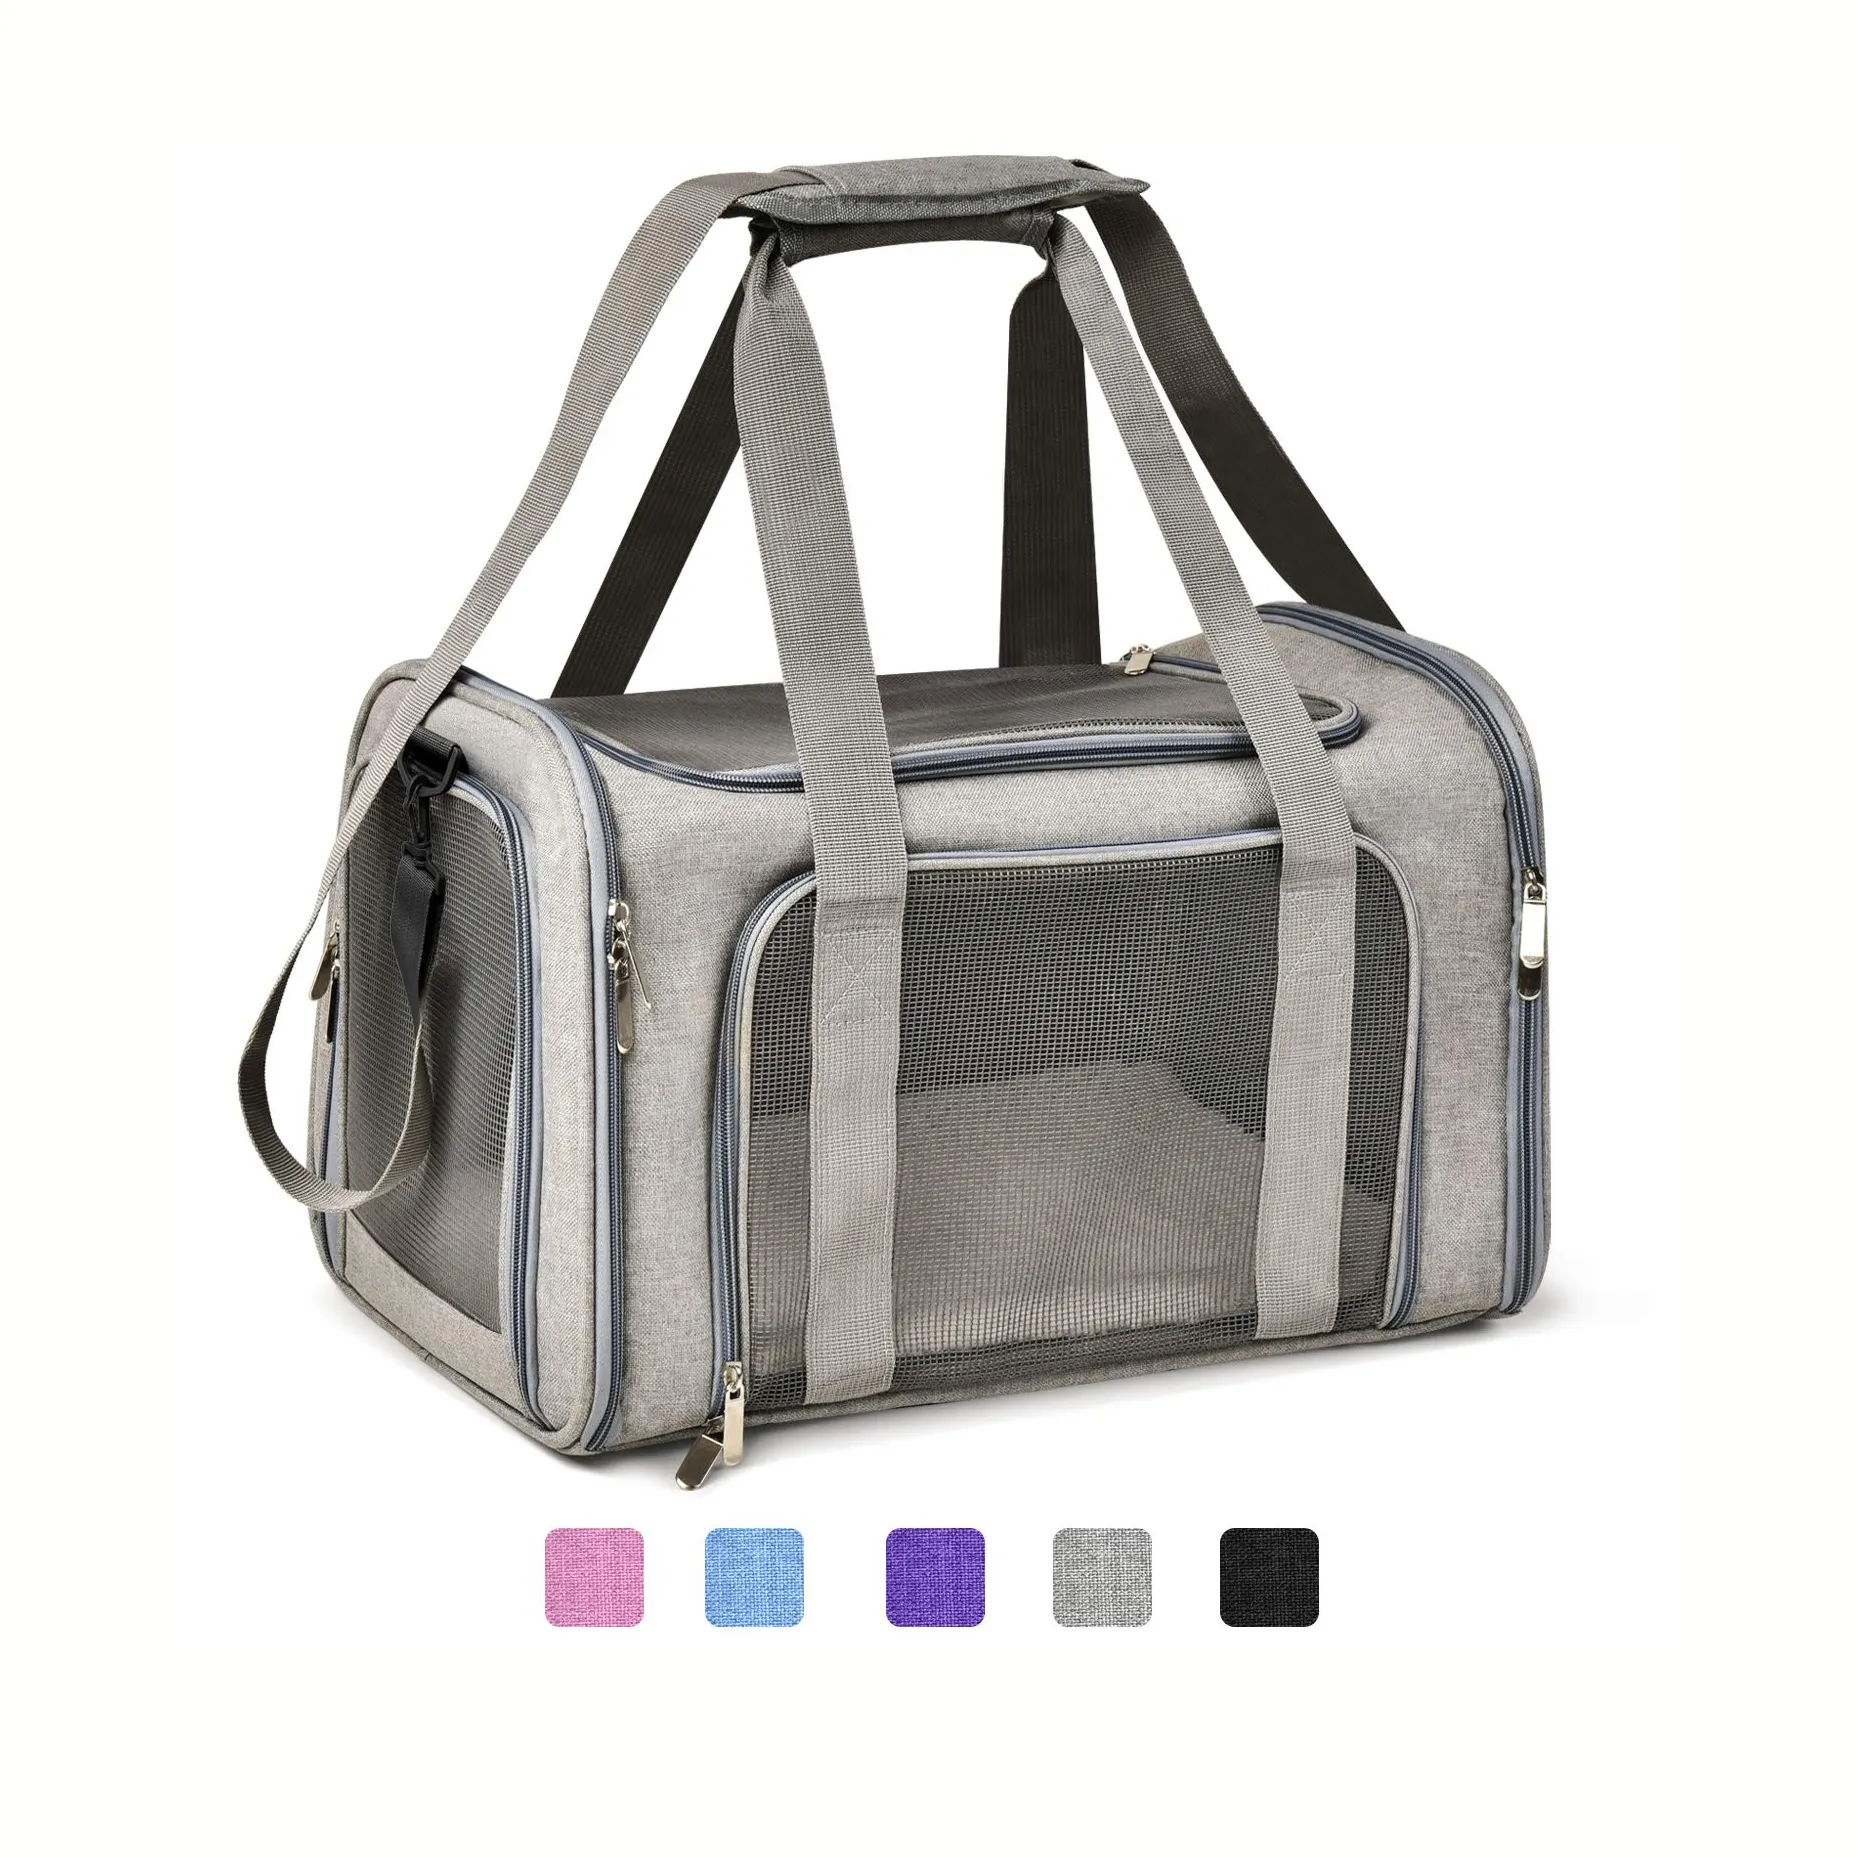 Airline Approved Carrier Soft Sided Collapsible Travel Puppy Carrier Pet Carrier bag High Quality Durable expandable Pet Cages